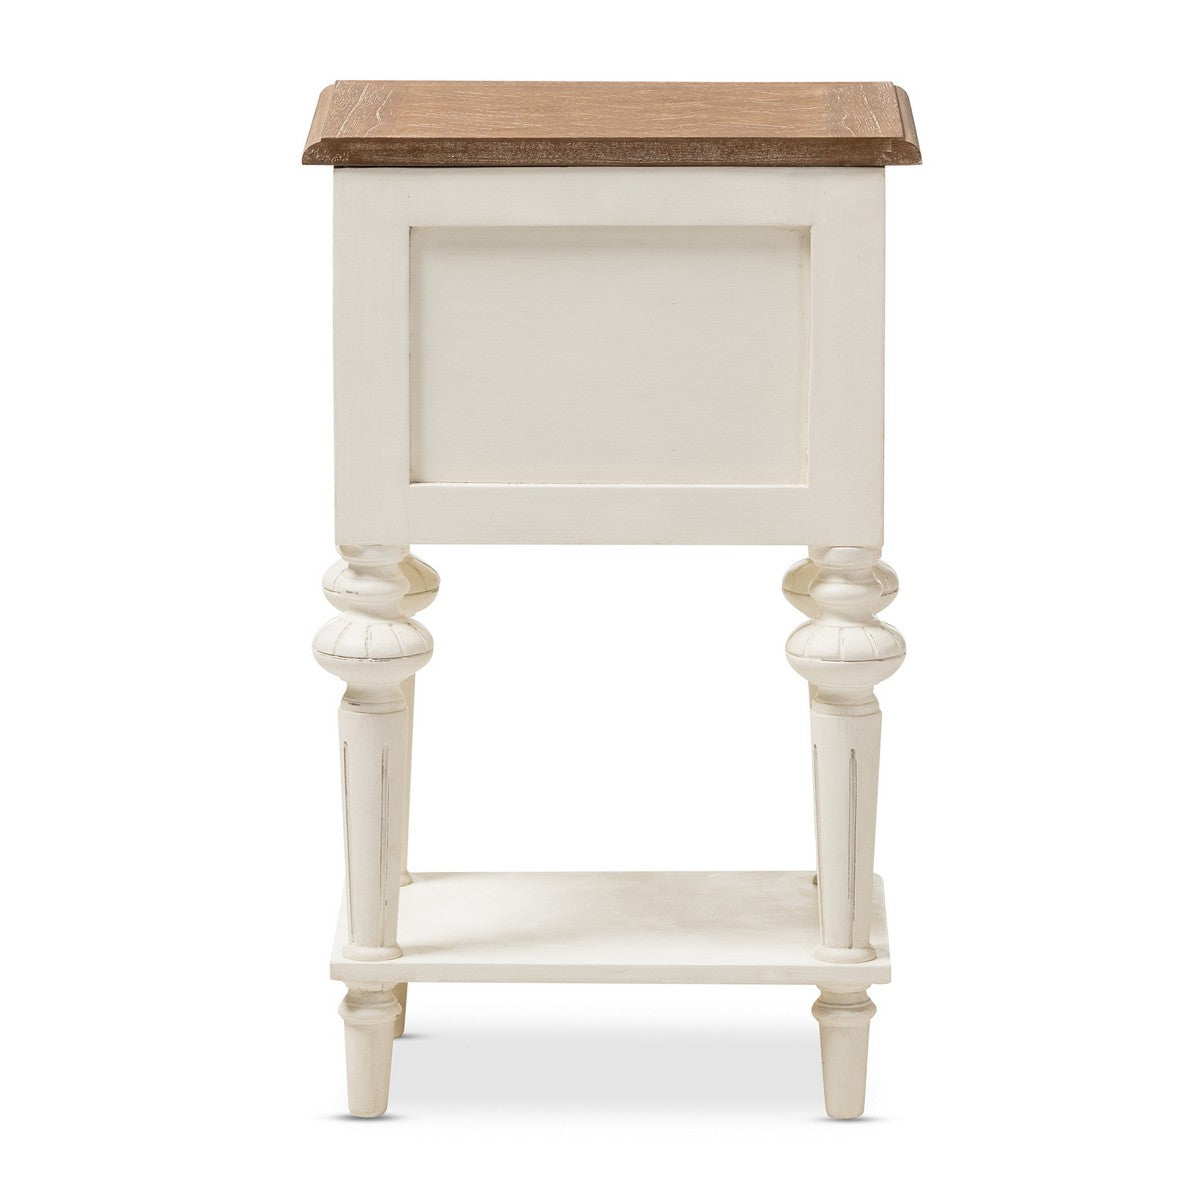 Baxton Studio Marquetterie French Provincial Style Weathered Oak and White Wash Distressed Finish Wood Two-Tone 2-Drawer and 1-Shelf Nightstand